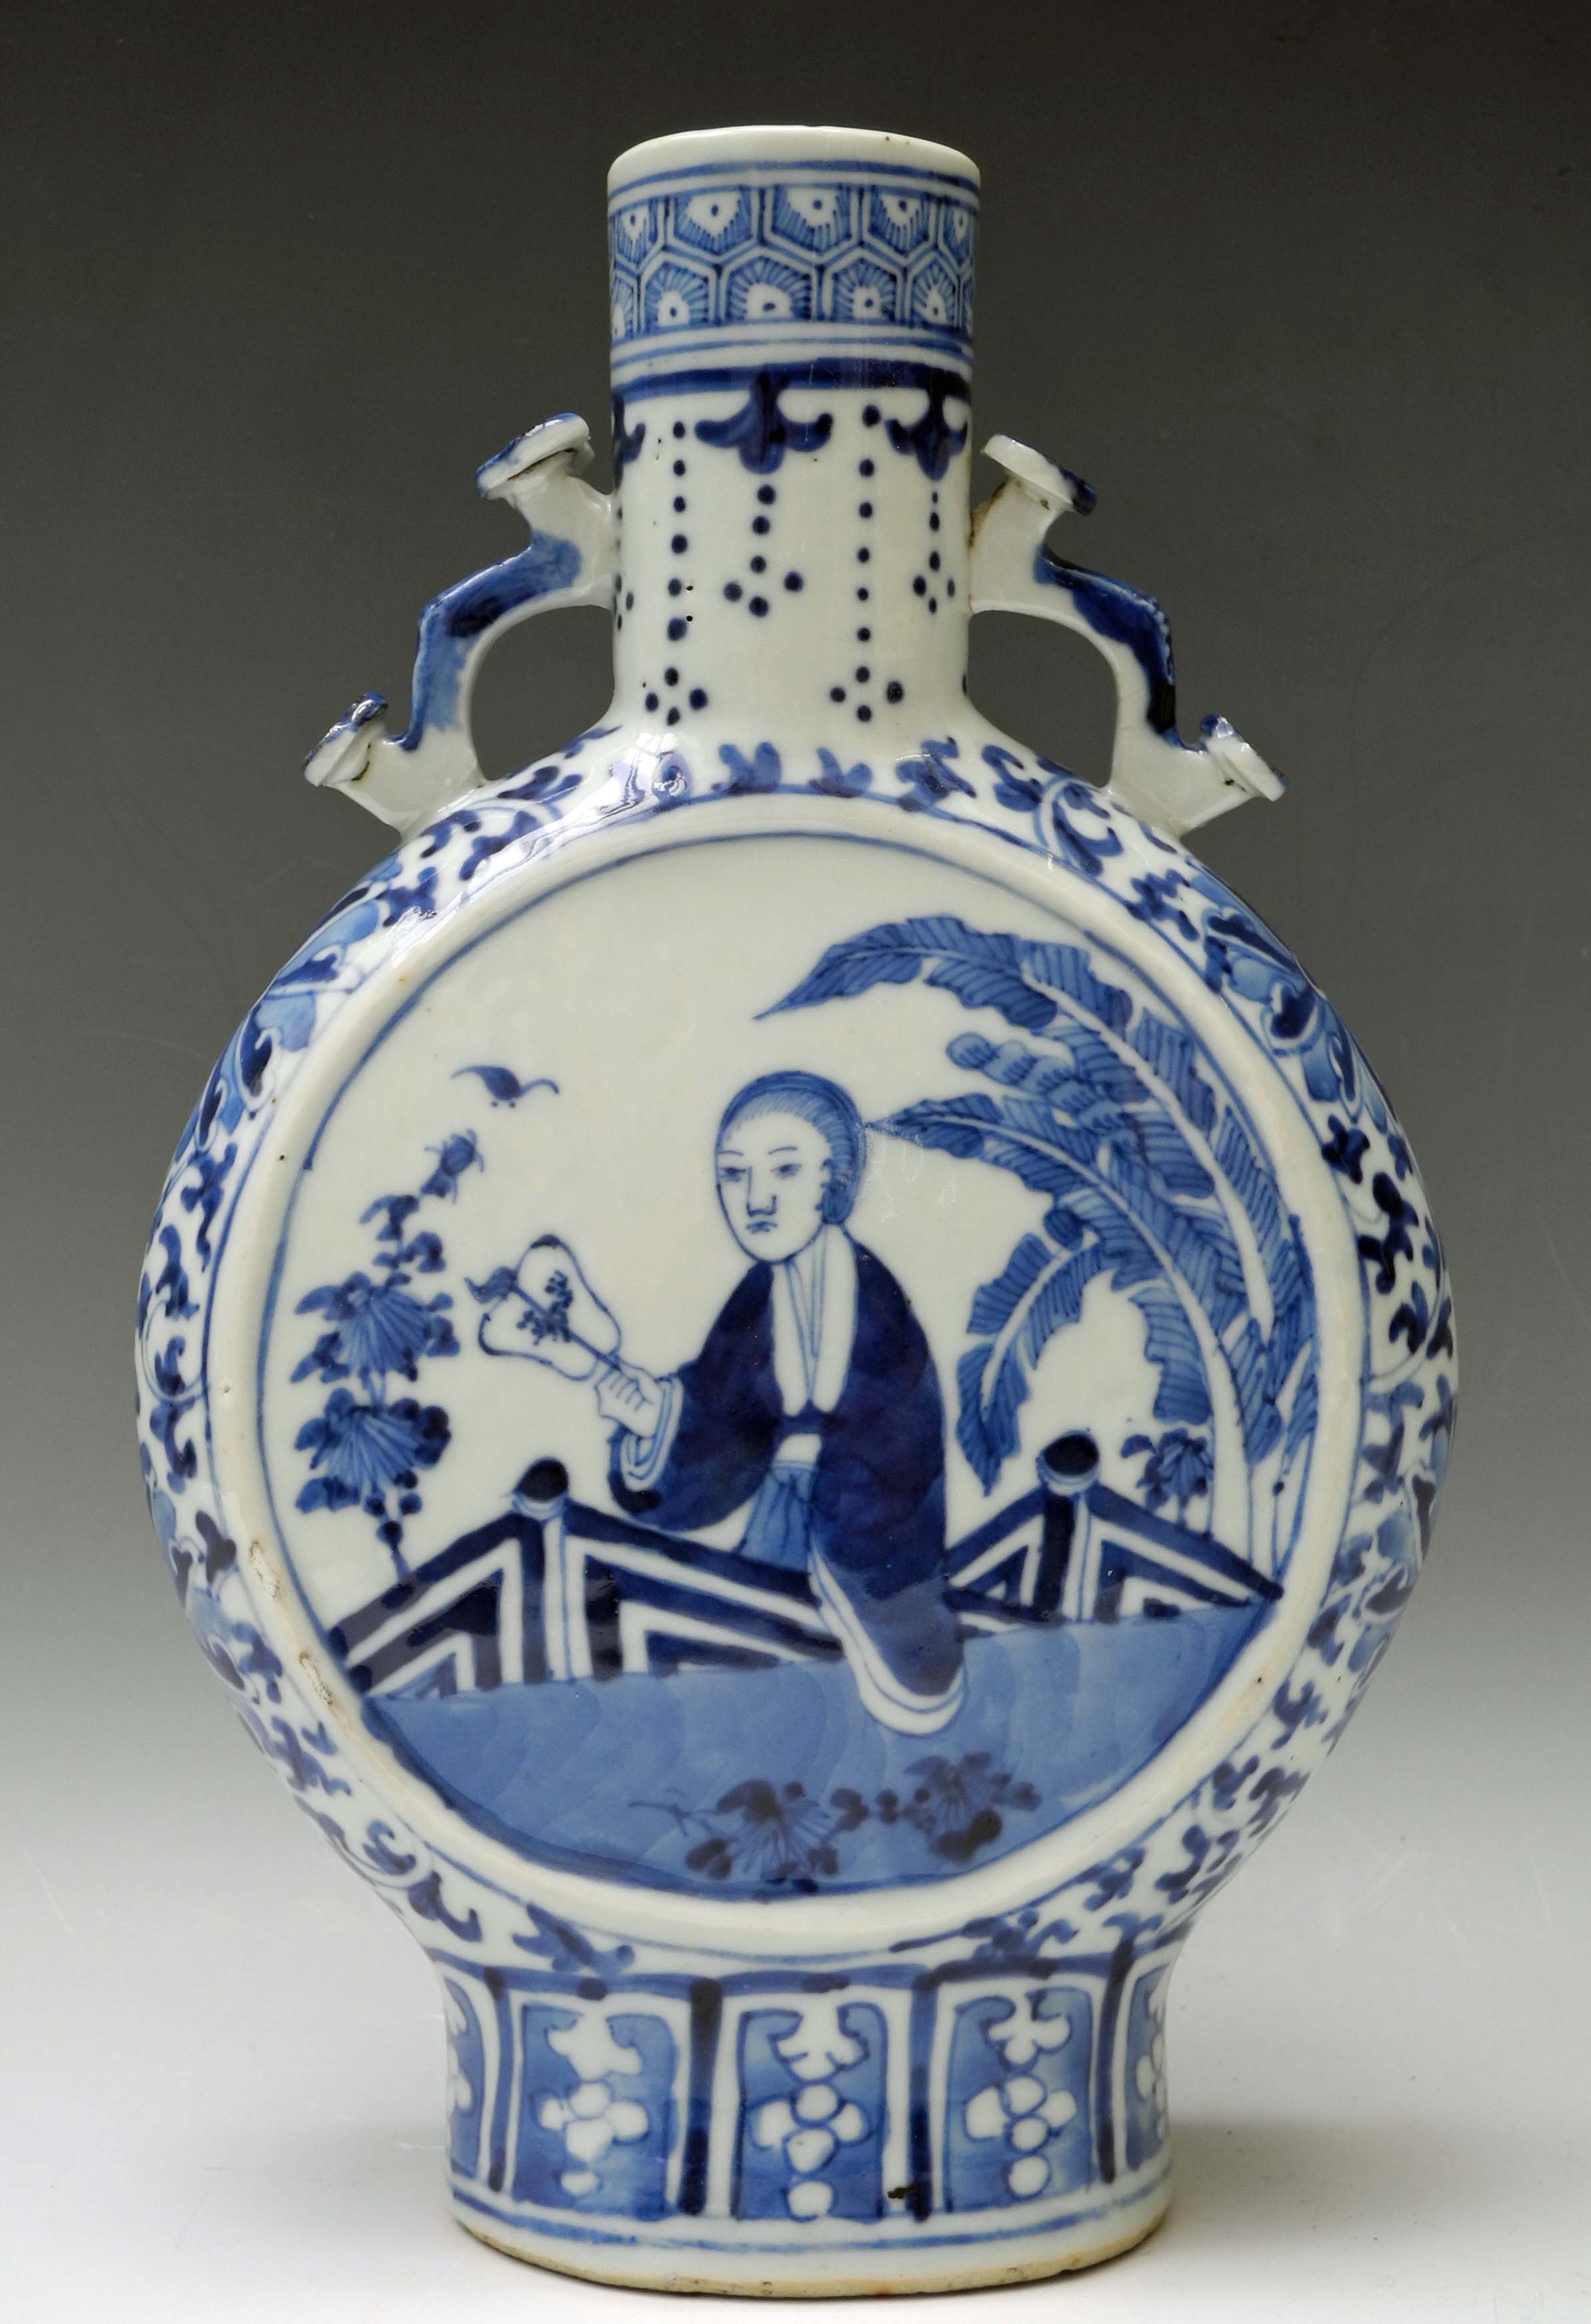 A 19th Century Chinese blue and white porcelain moon vase, decorated with a lady with fan and floral